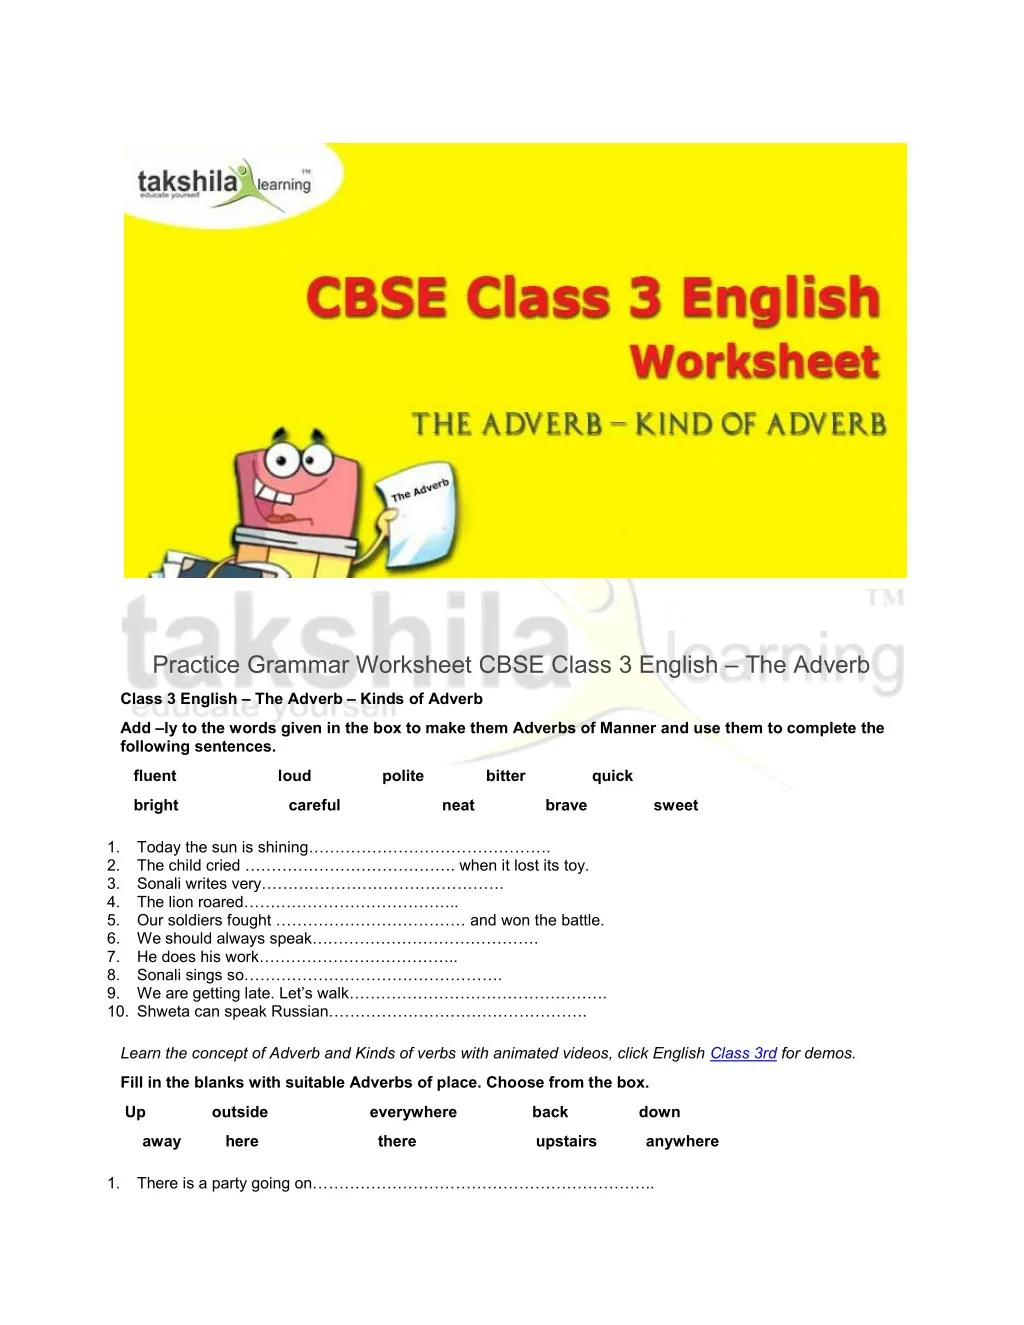 English Grammar Worksheet For Class 3 Pronouns Worksheet Exercises For Class 3 Cbse With